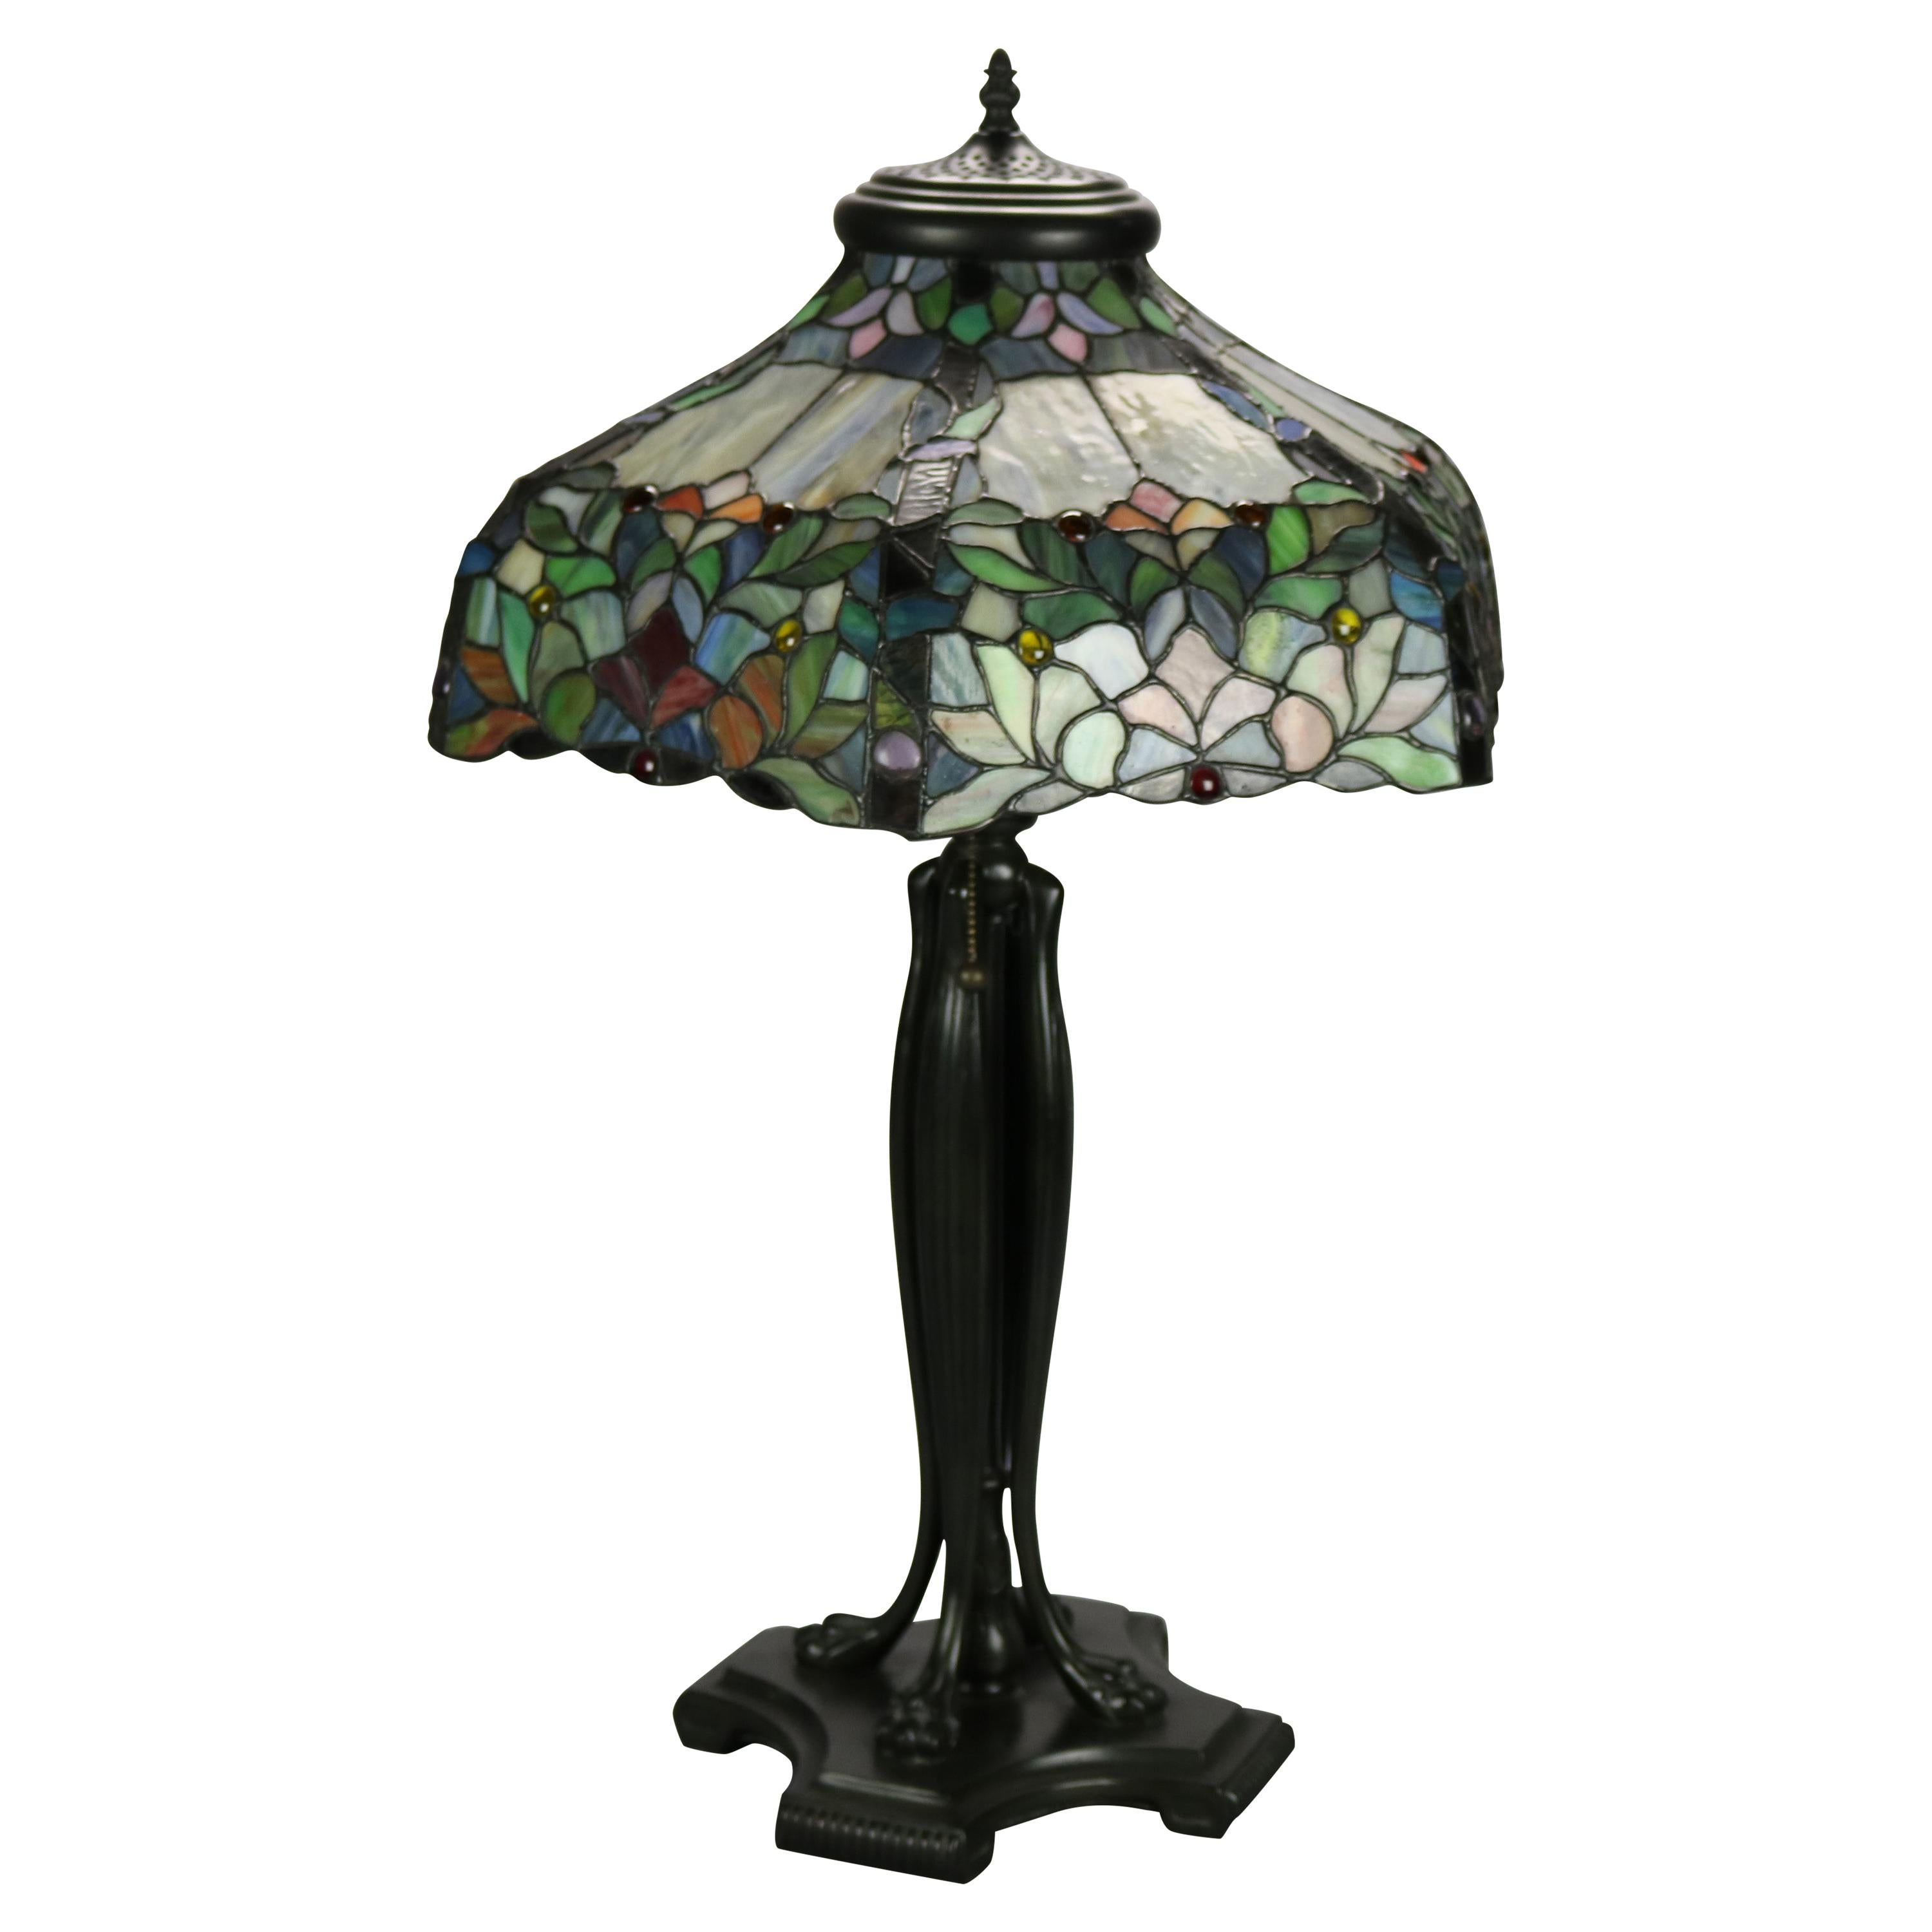 Vintage Dale Tiffany Leaded Glass Table Lamp with Bronzed Metal Base, 20th C